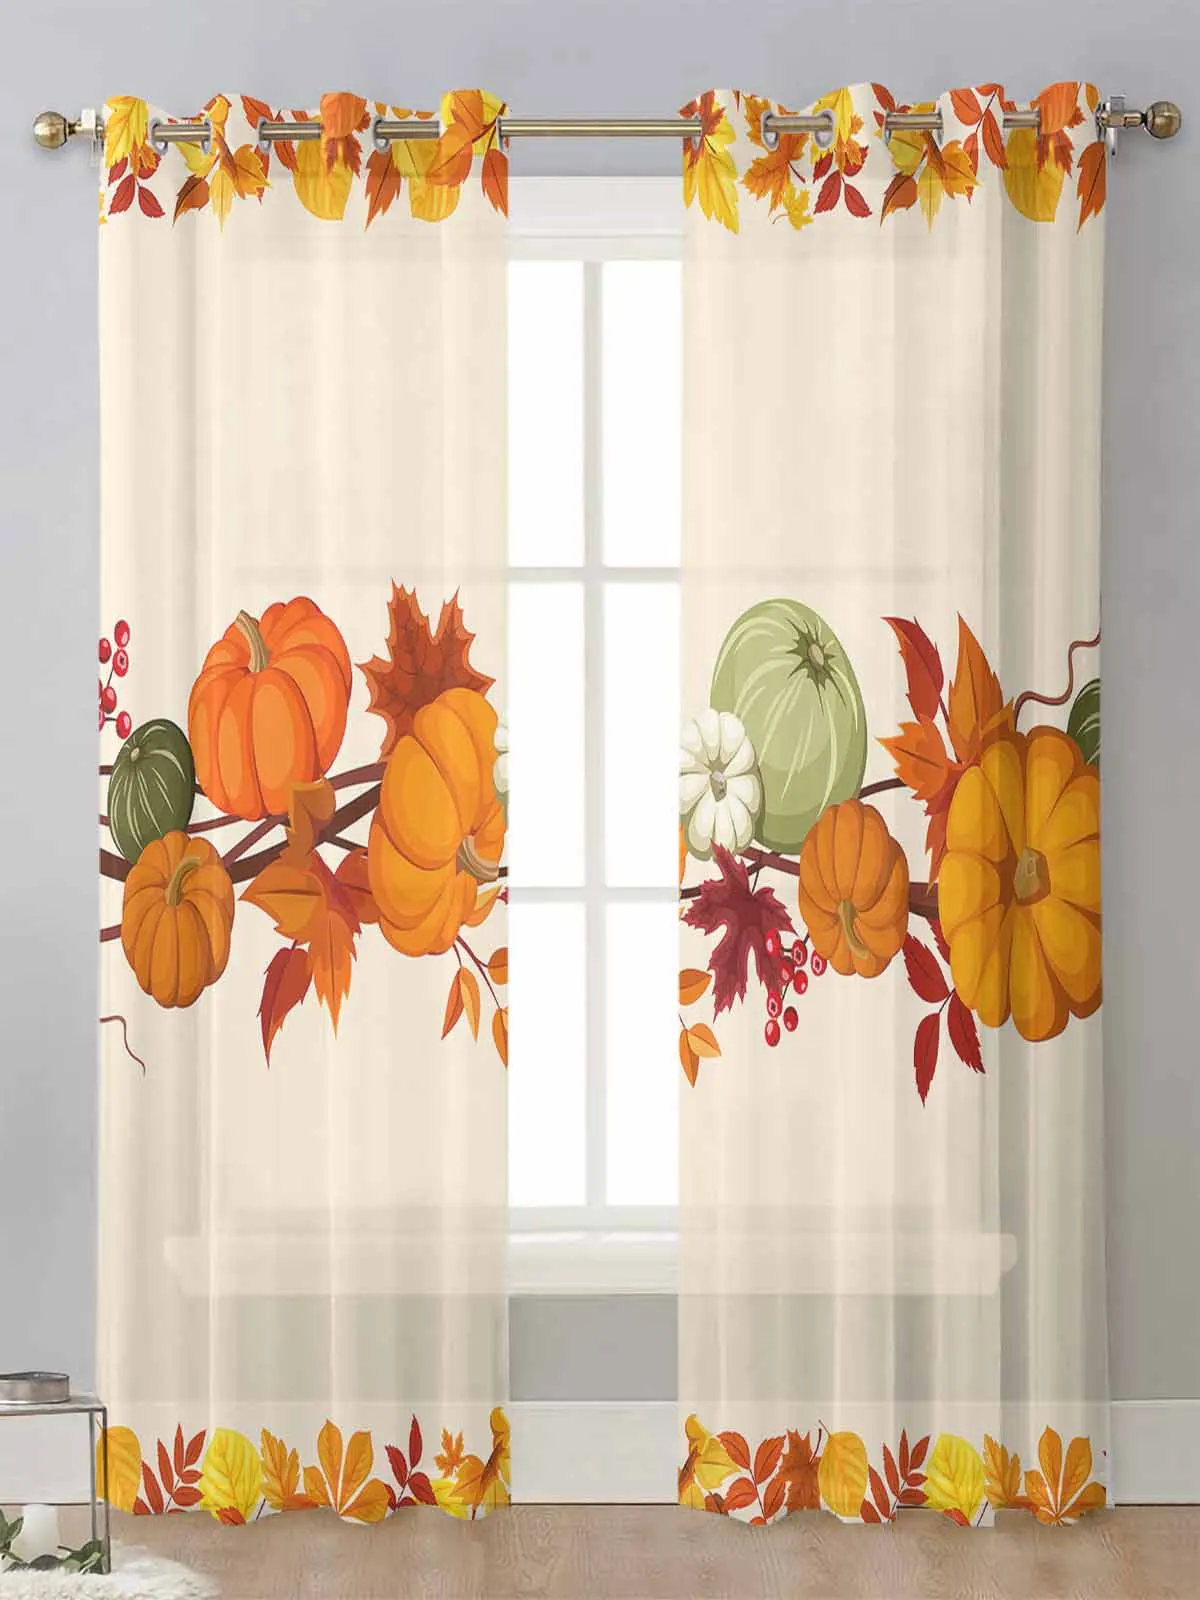 

Thanksgiving Pumpkin Maple Leaf Sheer Curtains For Living Room Window Transparent Voile Tulle Curtain Cortinas Drapes Home Decor